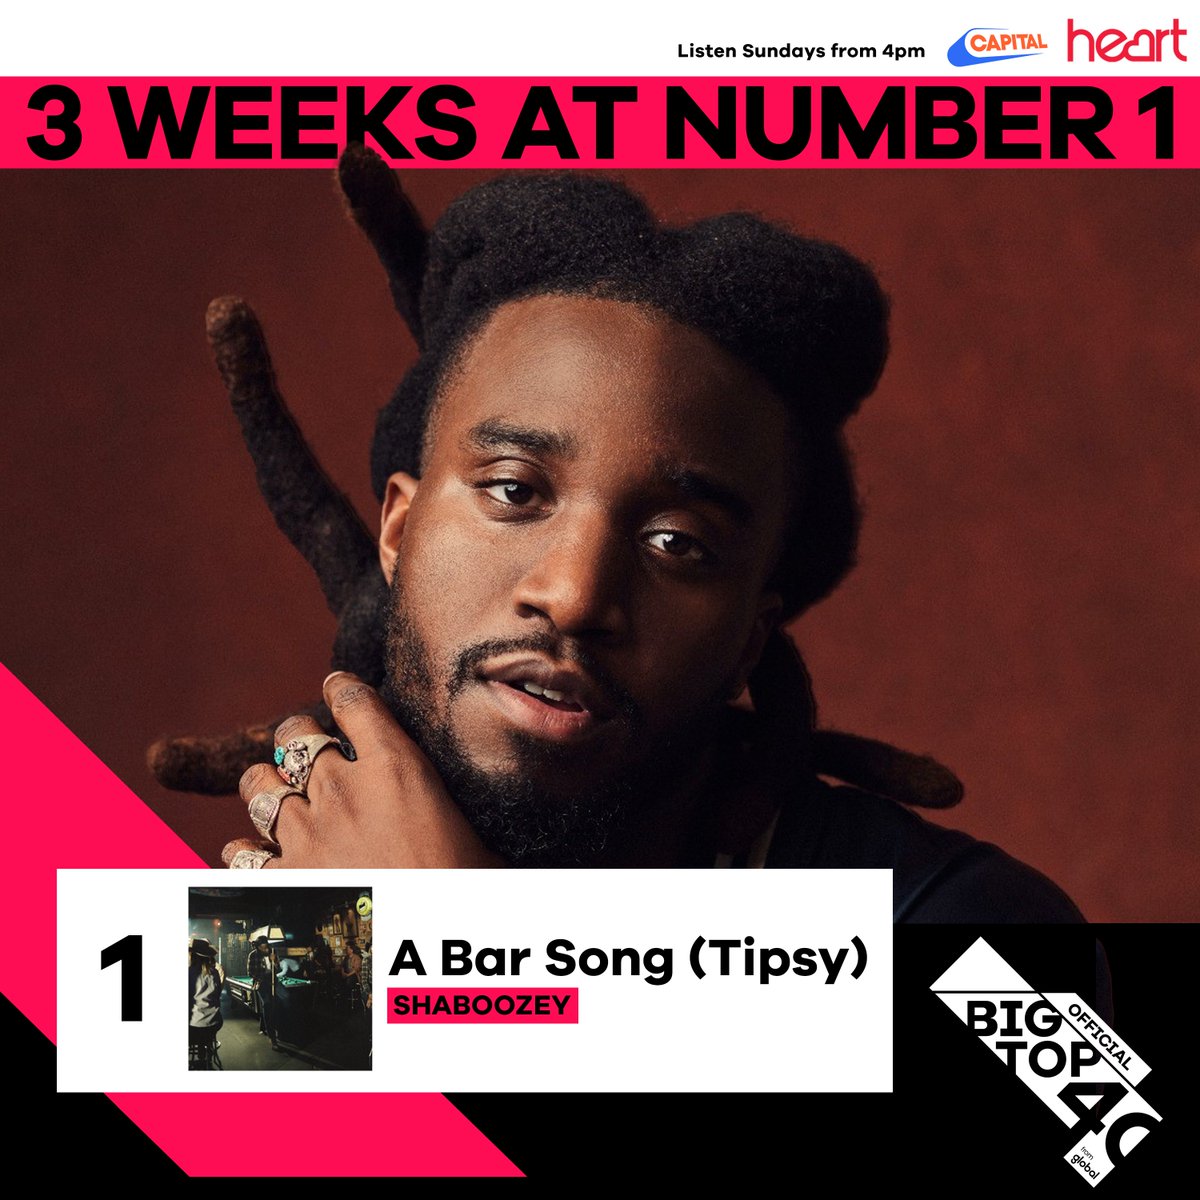 Congrats @ShaboozeysJeans on THREE WEEKS at Number 1 👏